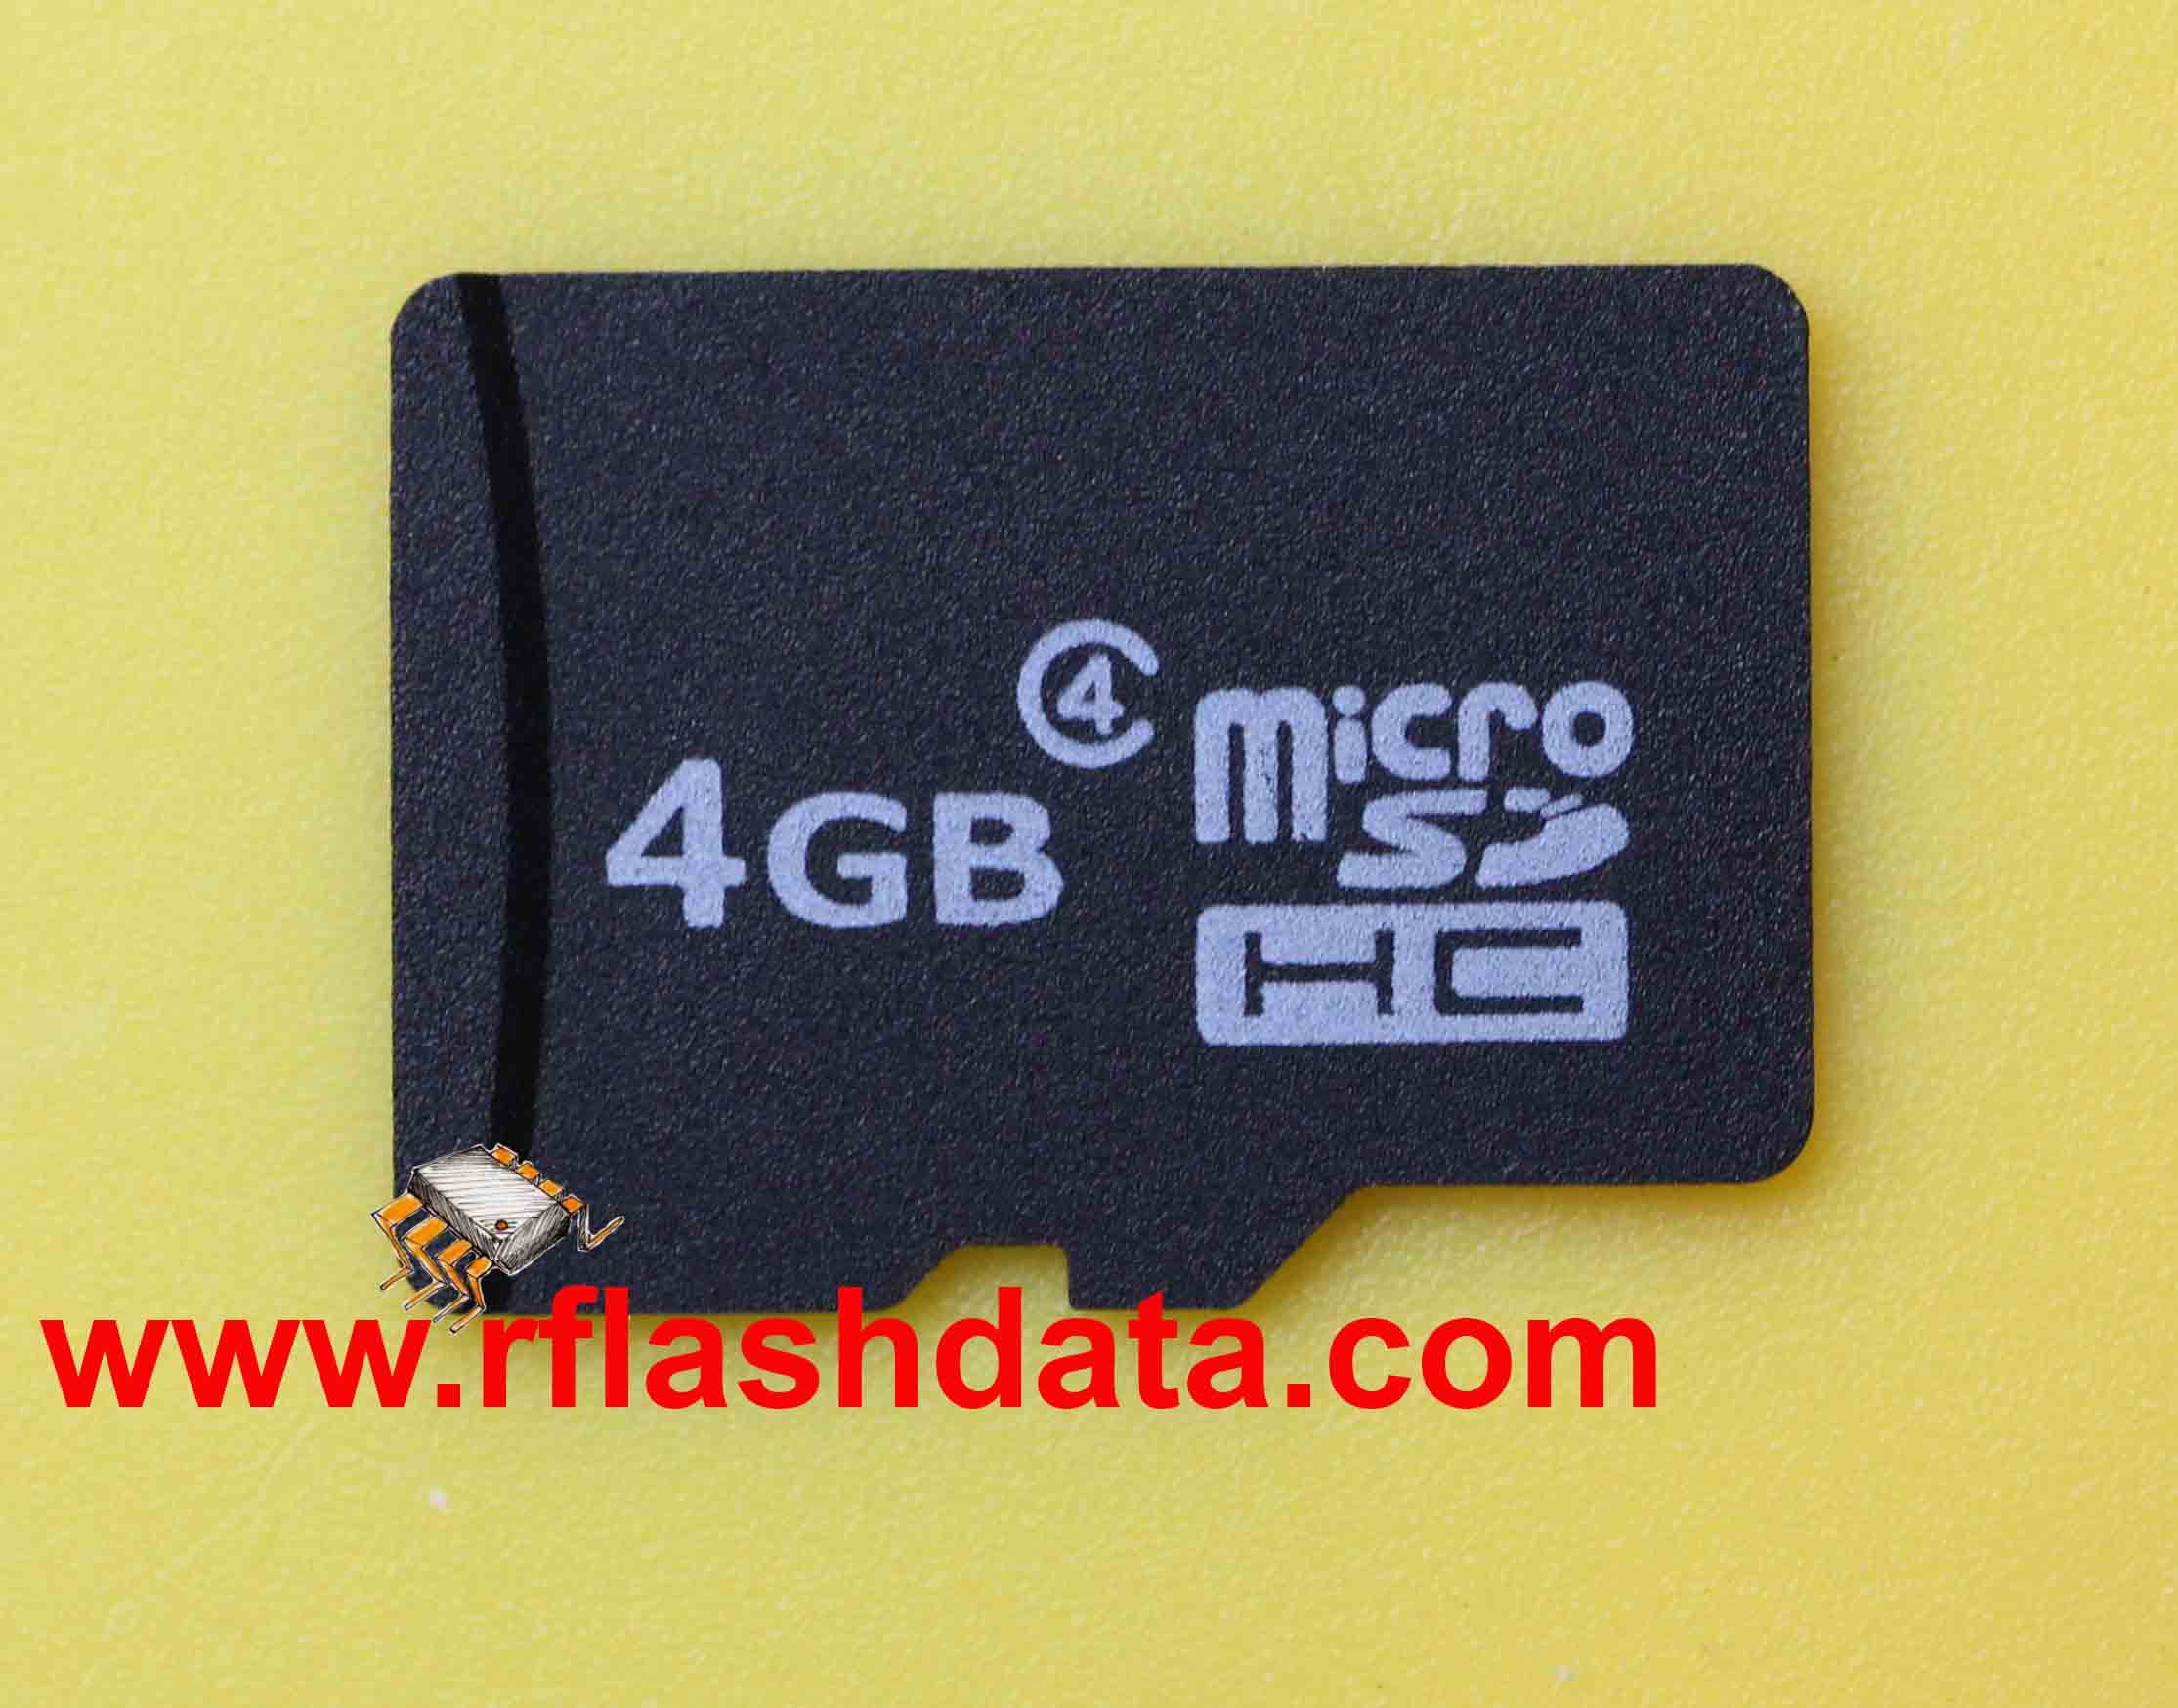 4GB memory card recovery